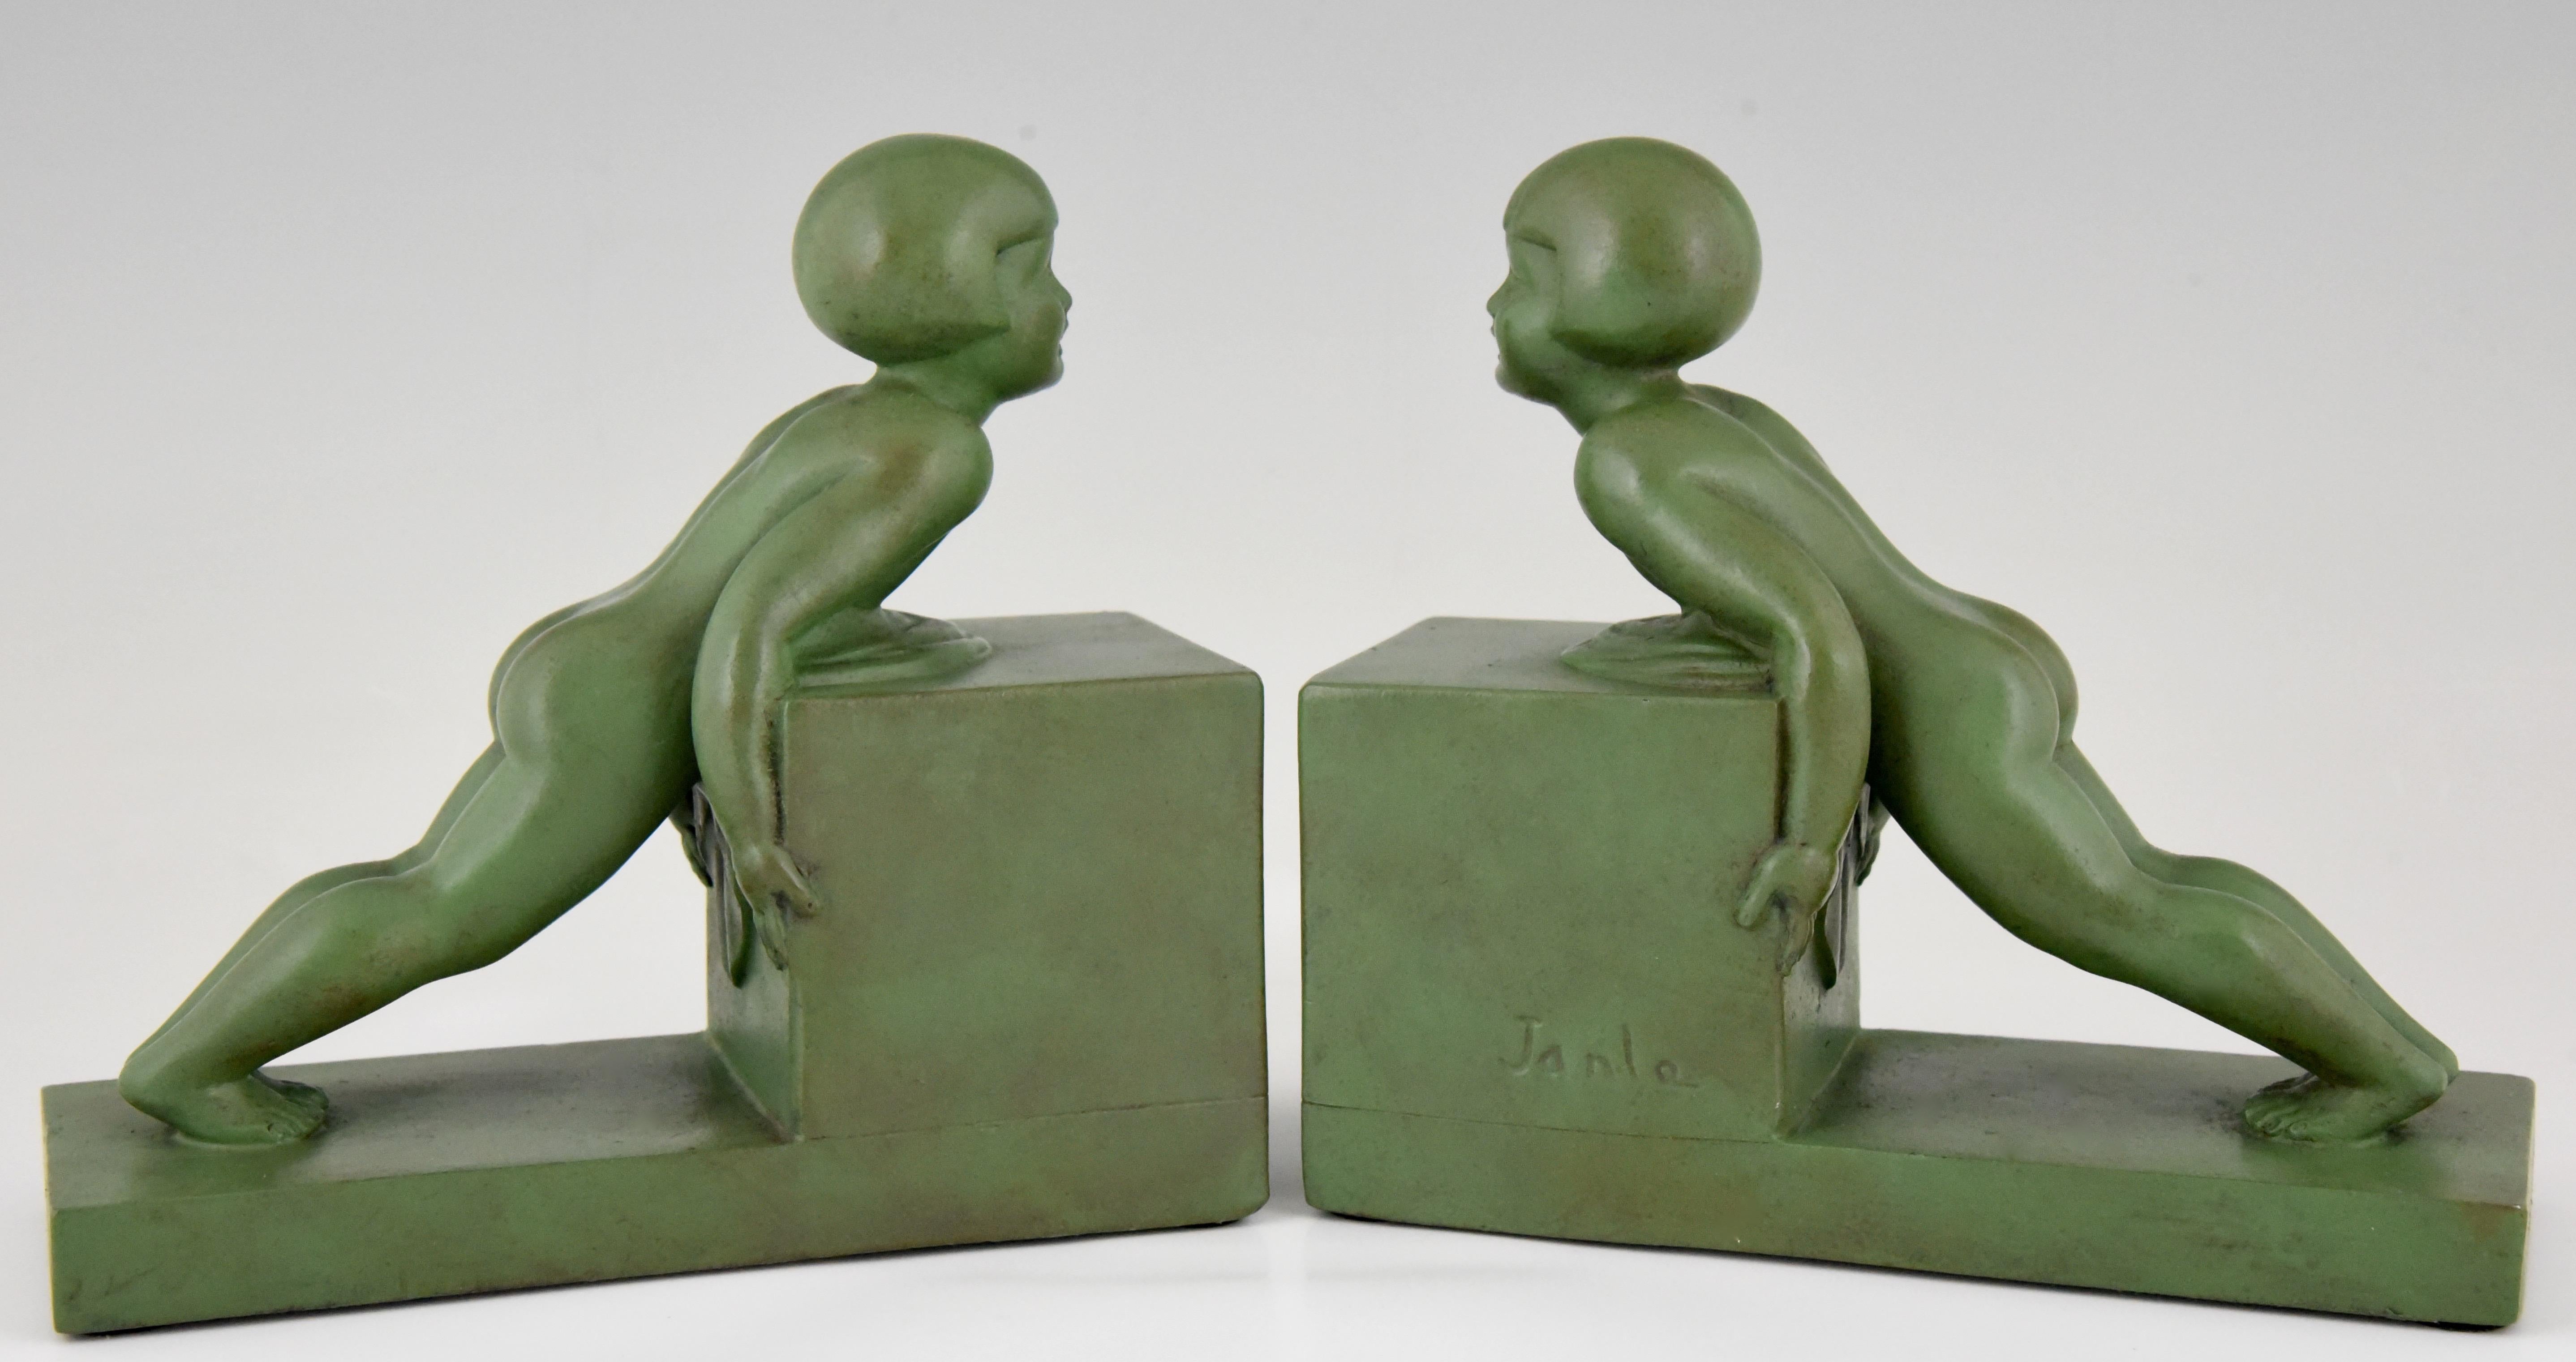 Cute pair of Art Deco child bookends picturing two little girls pushing a heavy cube. The sculptures are made of Art metal with lovely green patina. Signed by the French artist Janle, circa 1930.